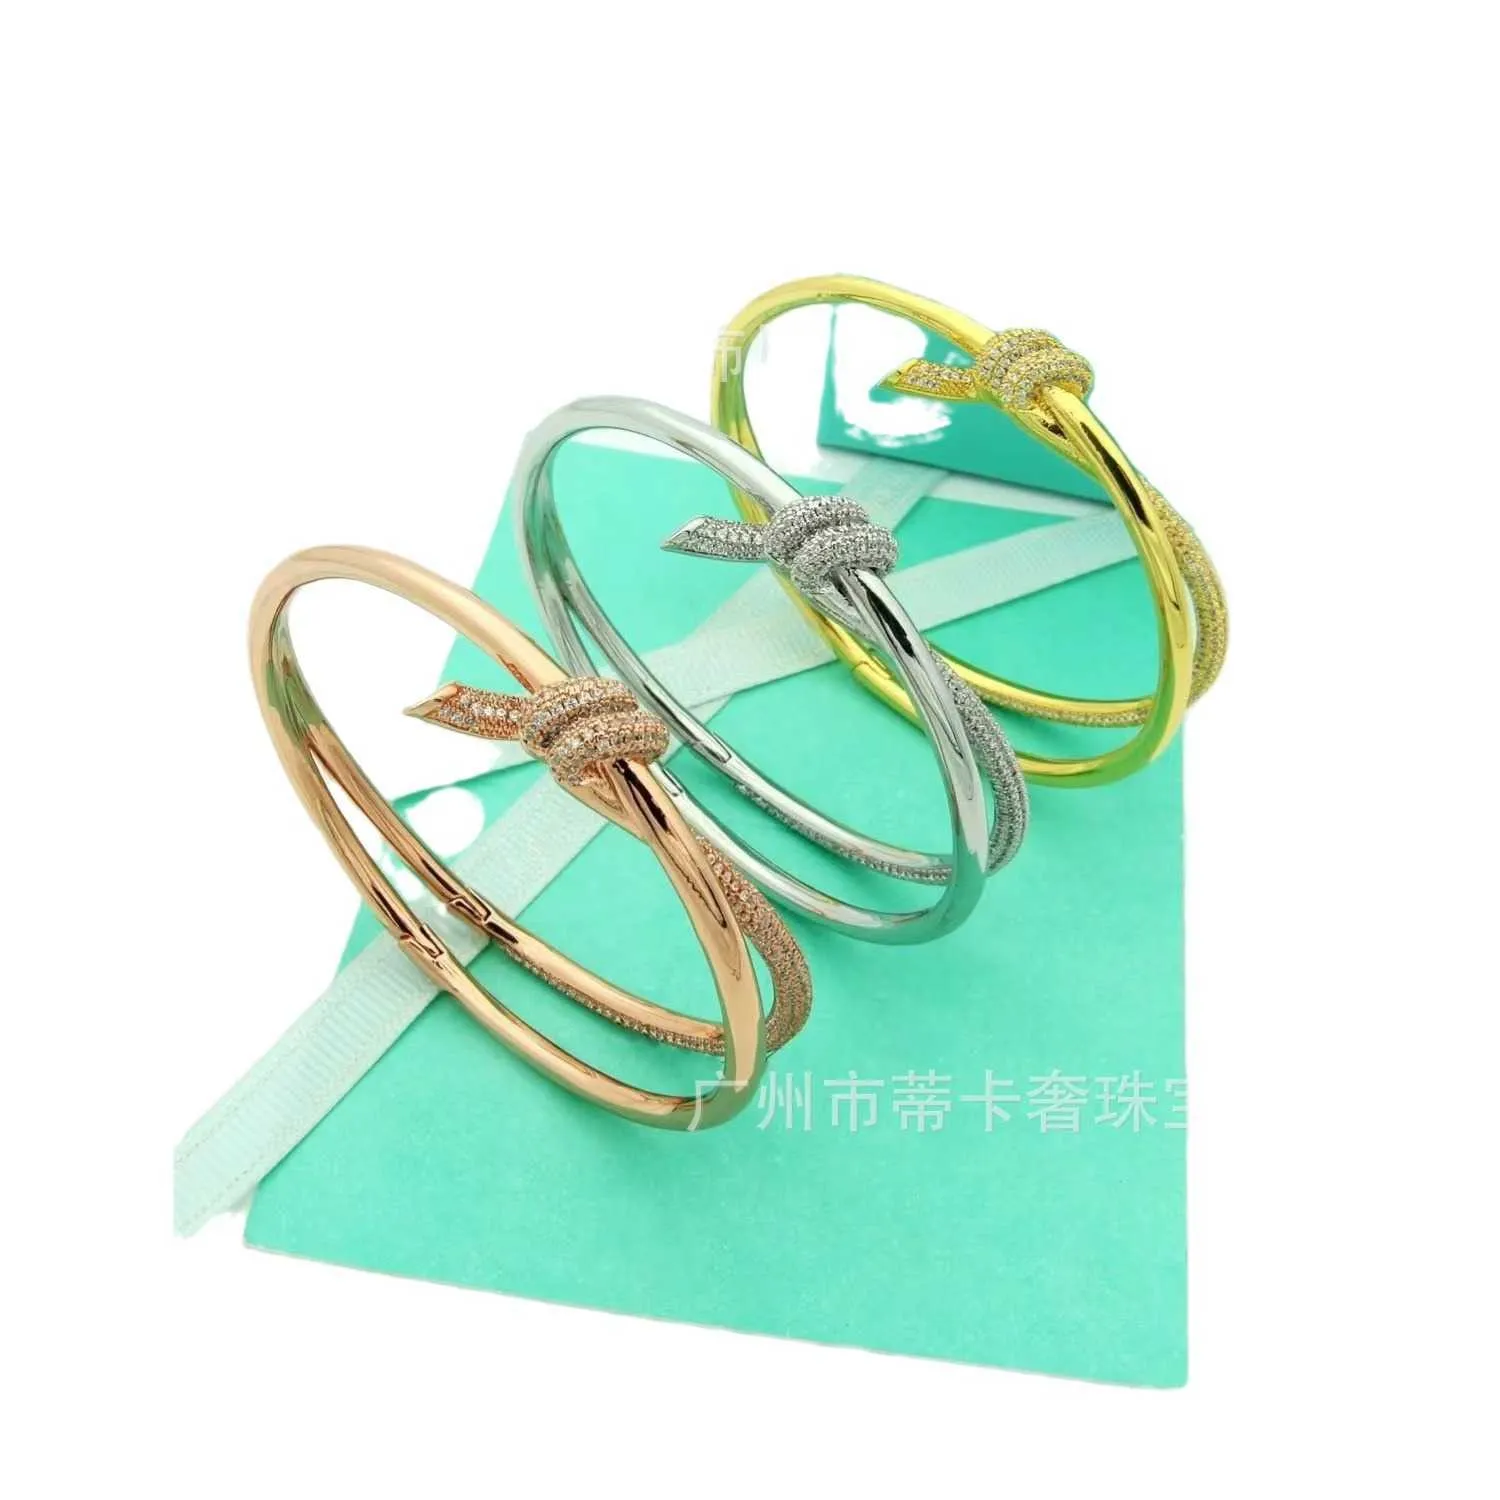 Seiko knot series bracelet female Gold materialstar same simple and generous twist rope